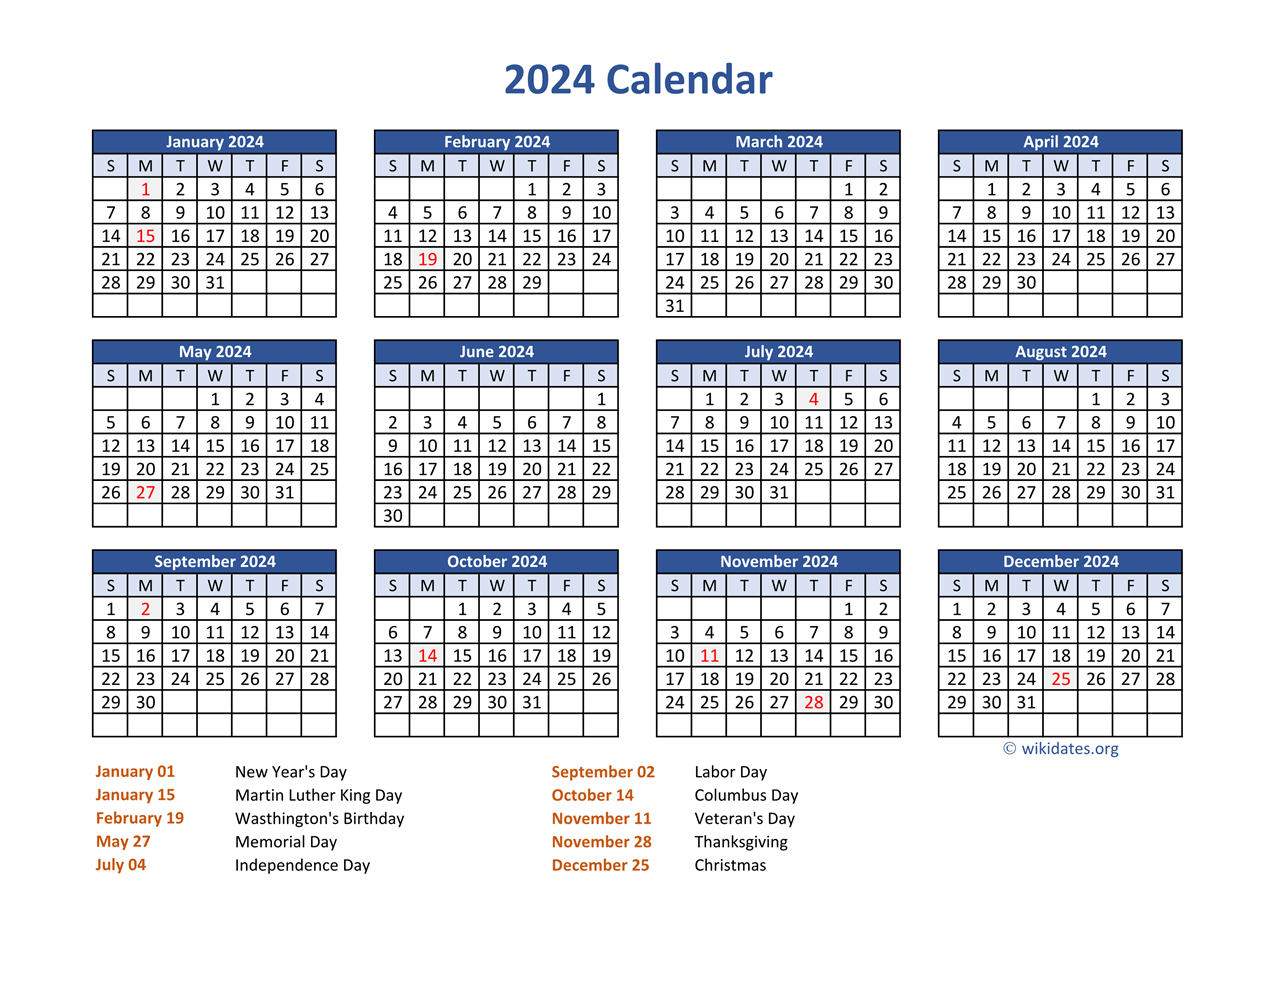 Pdf Calendar 2024 With Federal Holidays | Wikidates for 2024 Yearly Printable Calendar With Holidays